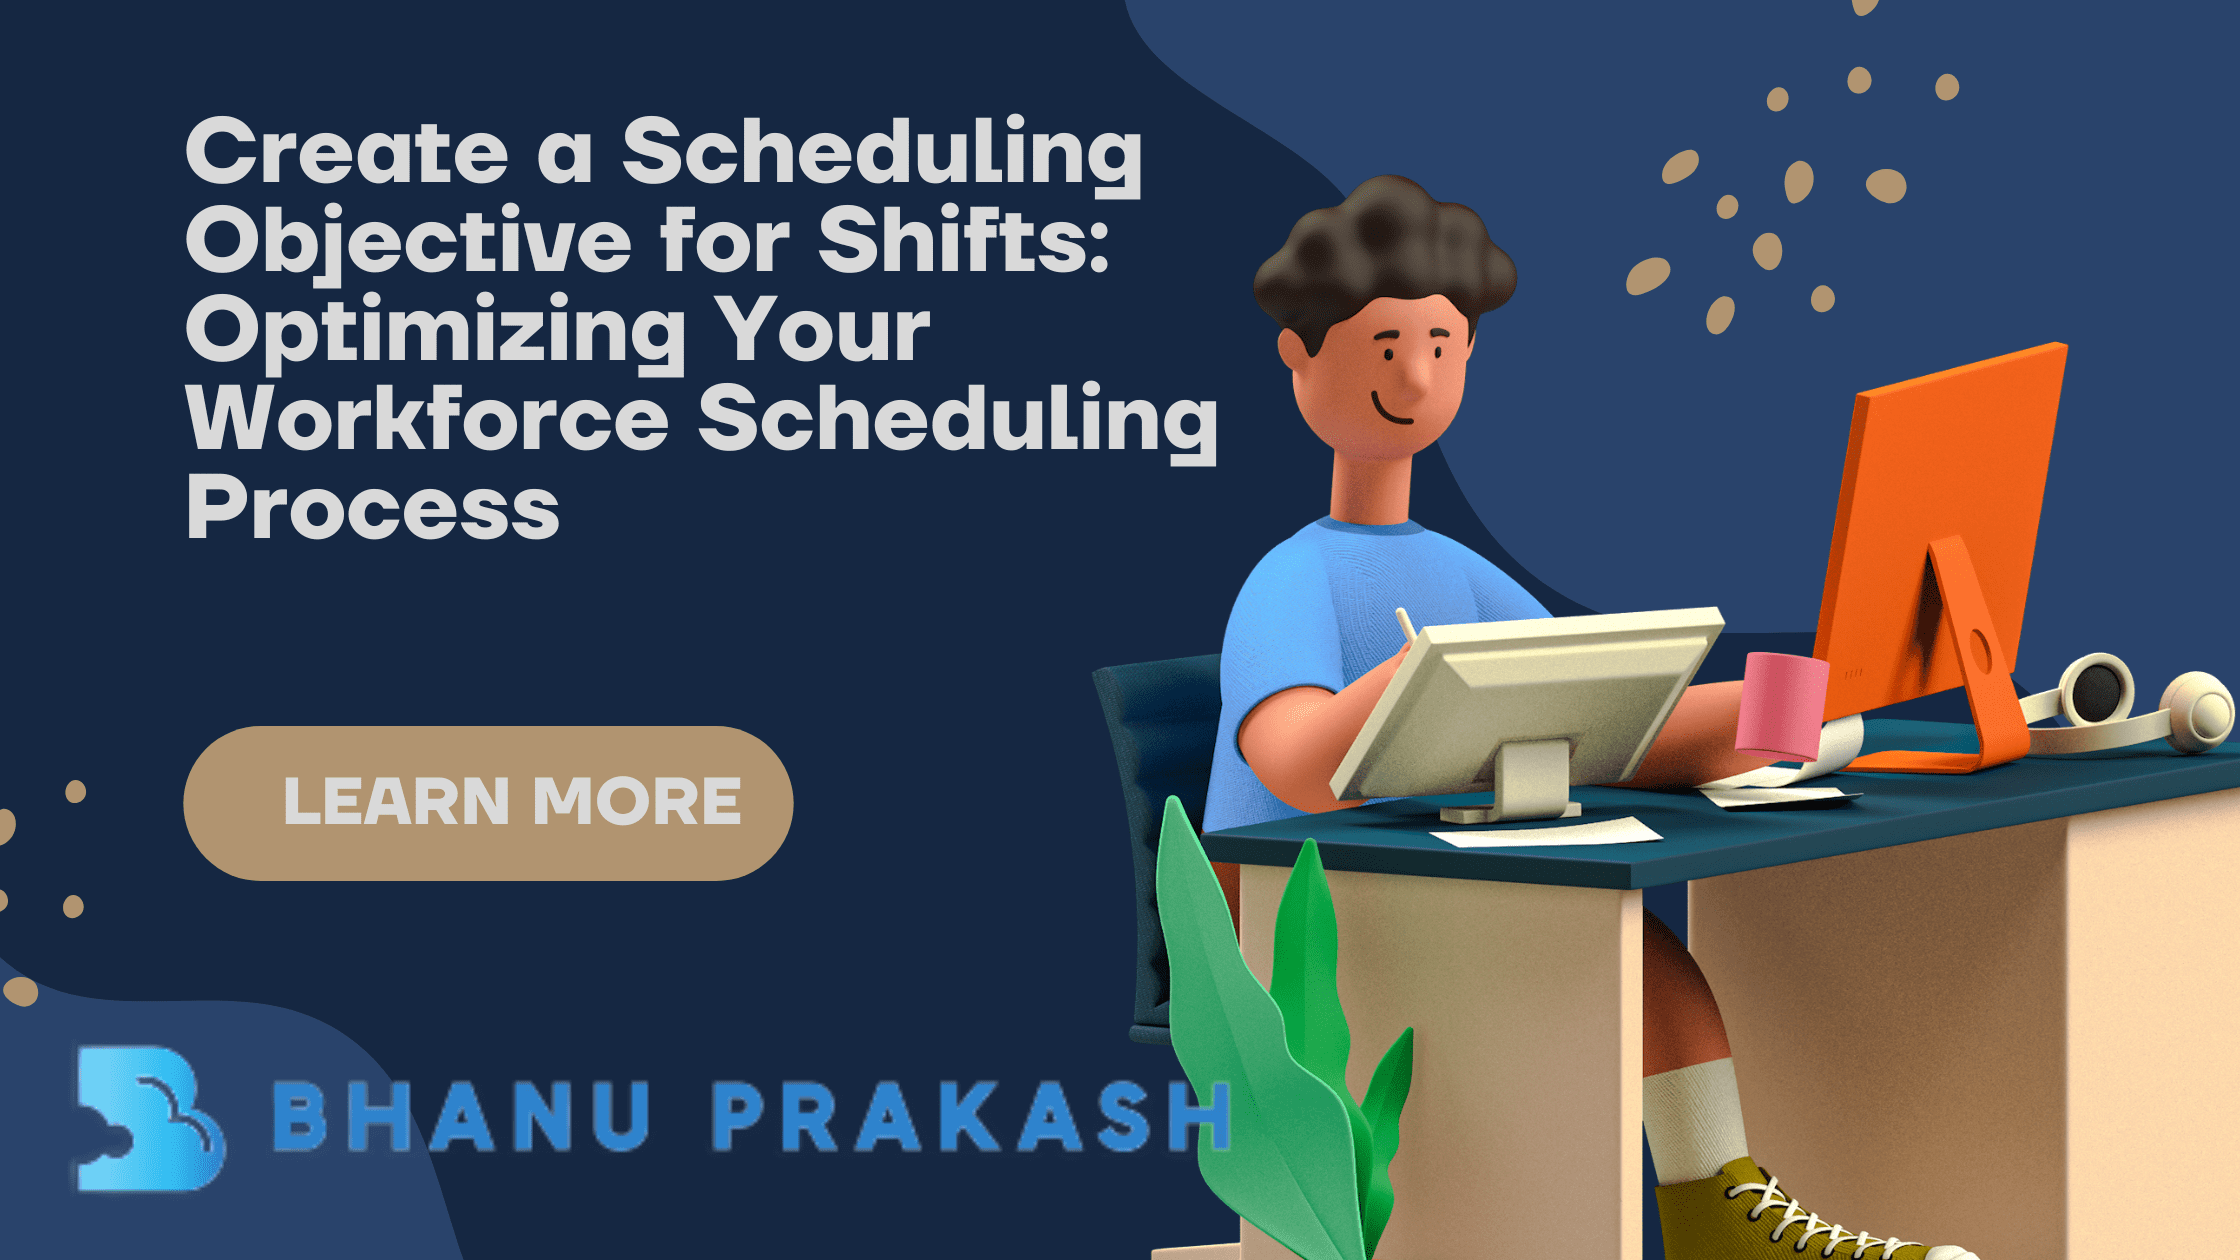 Create a Scheduling Objective for Shifts